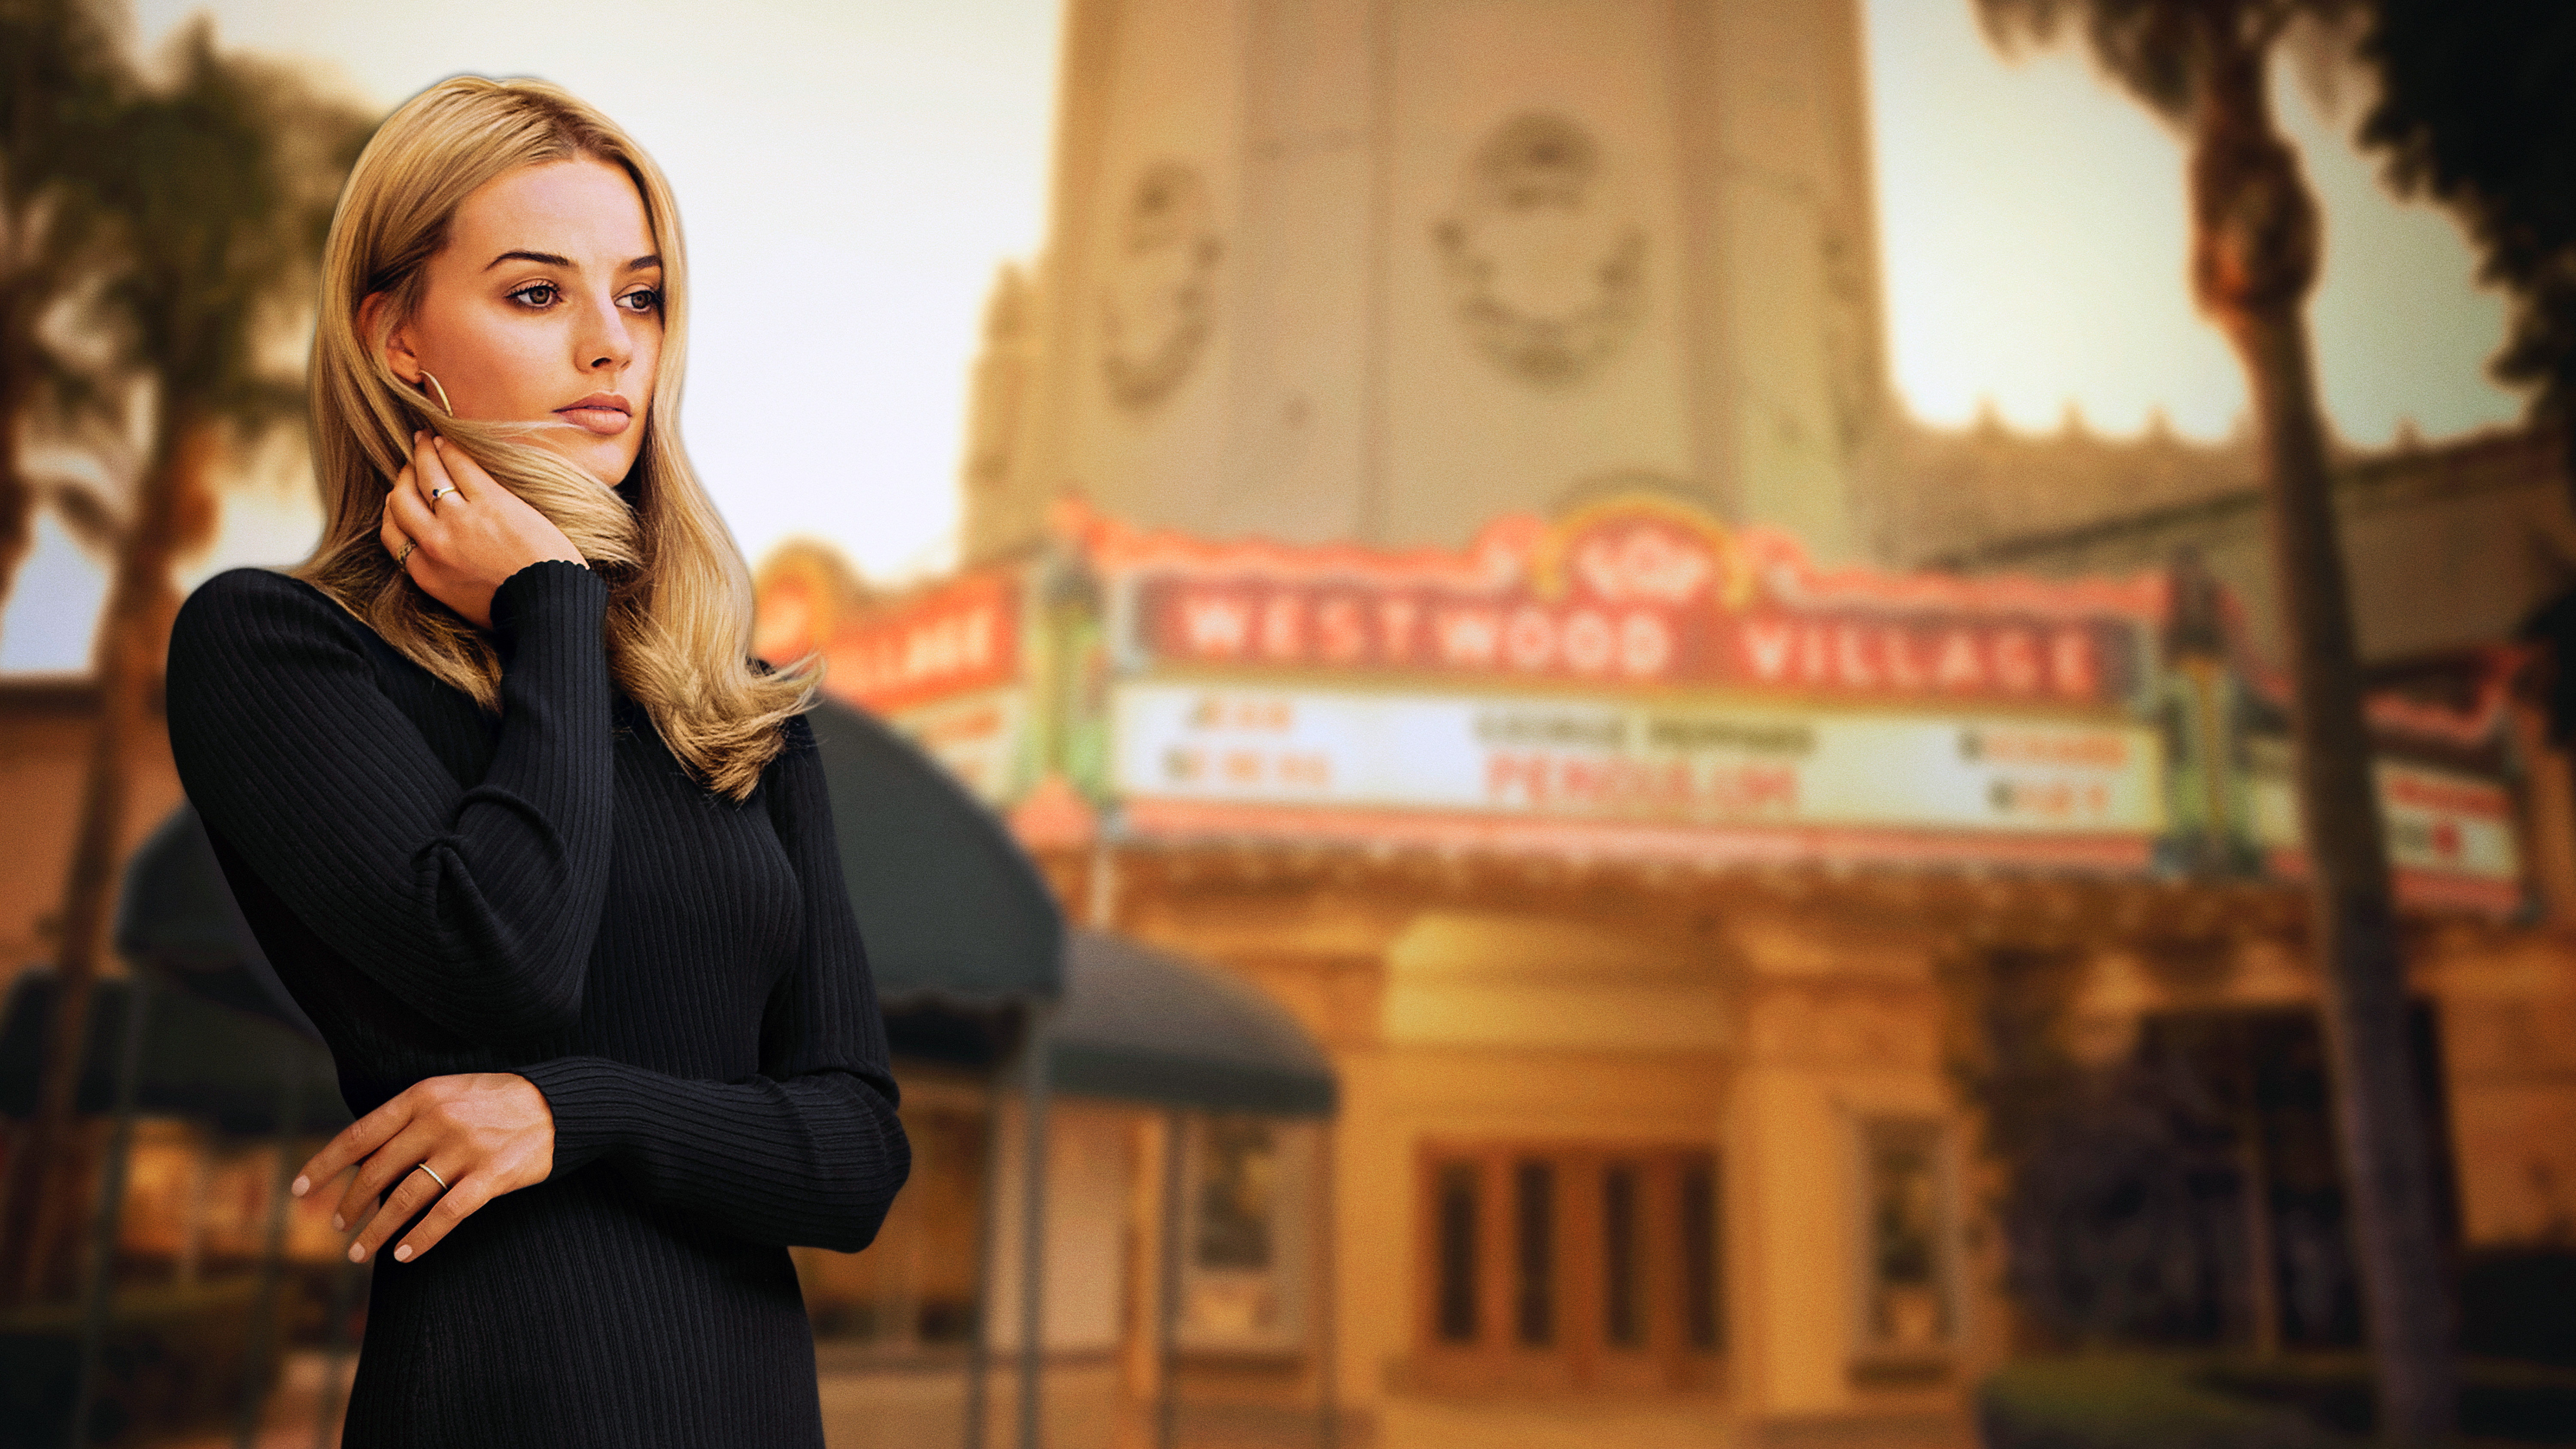 Margot Robbie Once Upon A Time In Hollywood 2019 5K